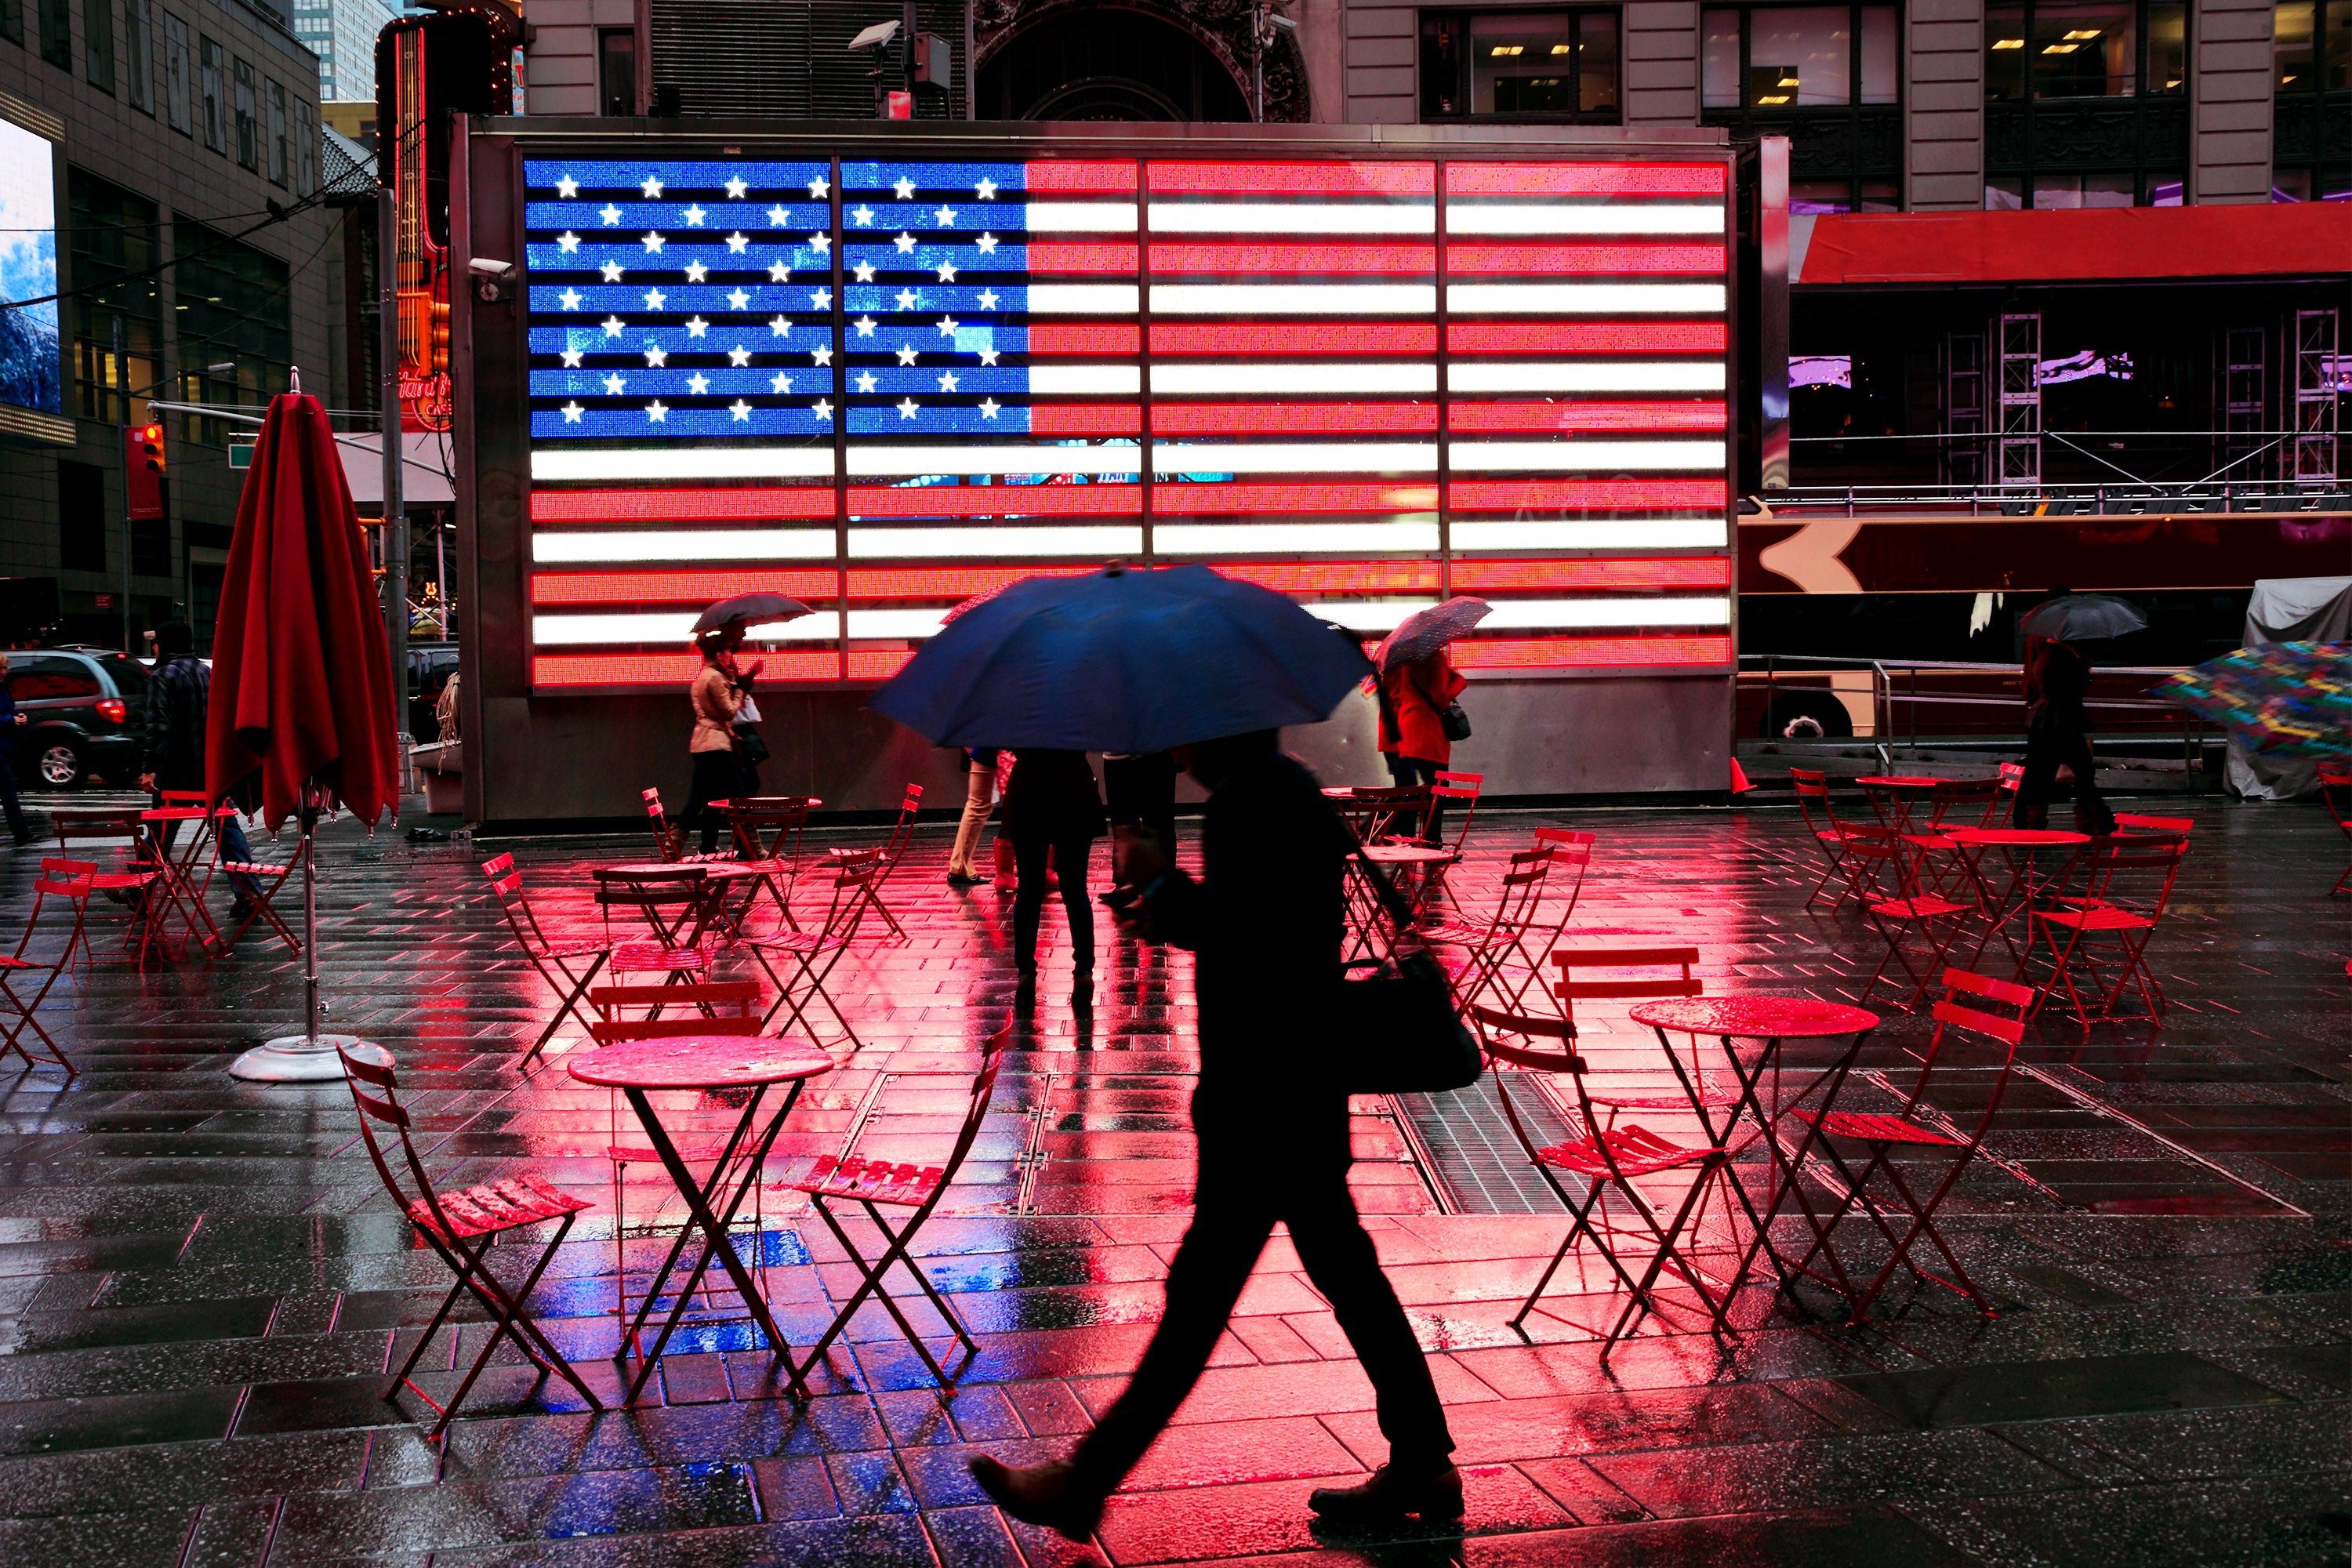 Pedestrian carrying umbrella and shoulder bag silhouette against the famous illuminated American Flag in very wet, dark Times Square